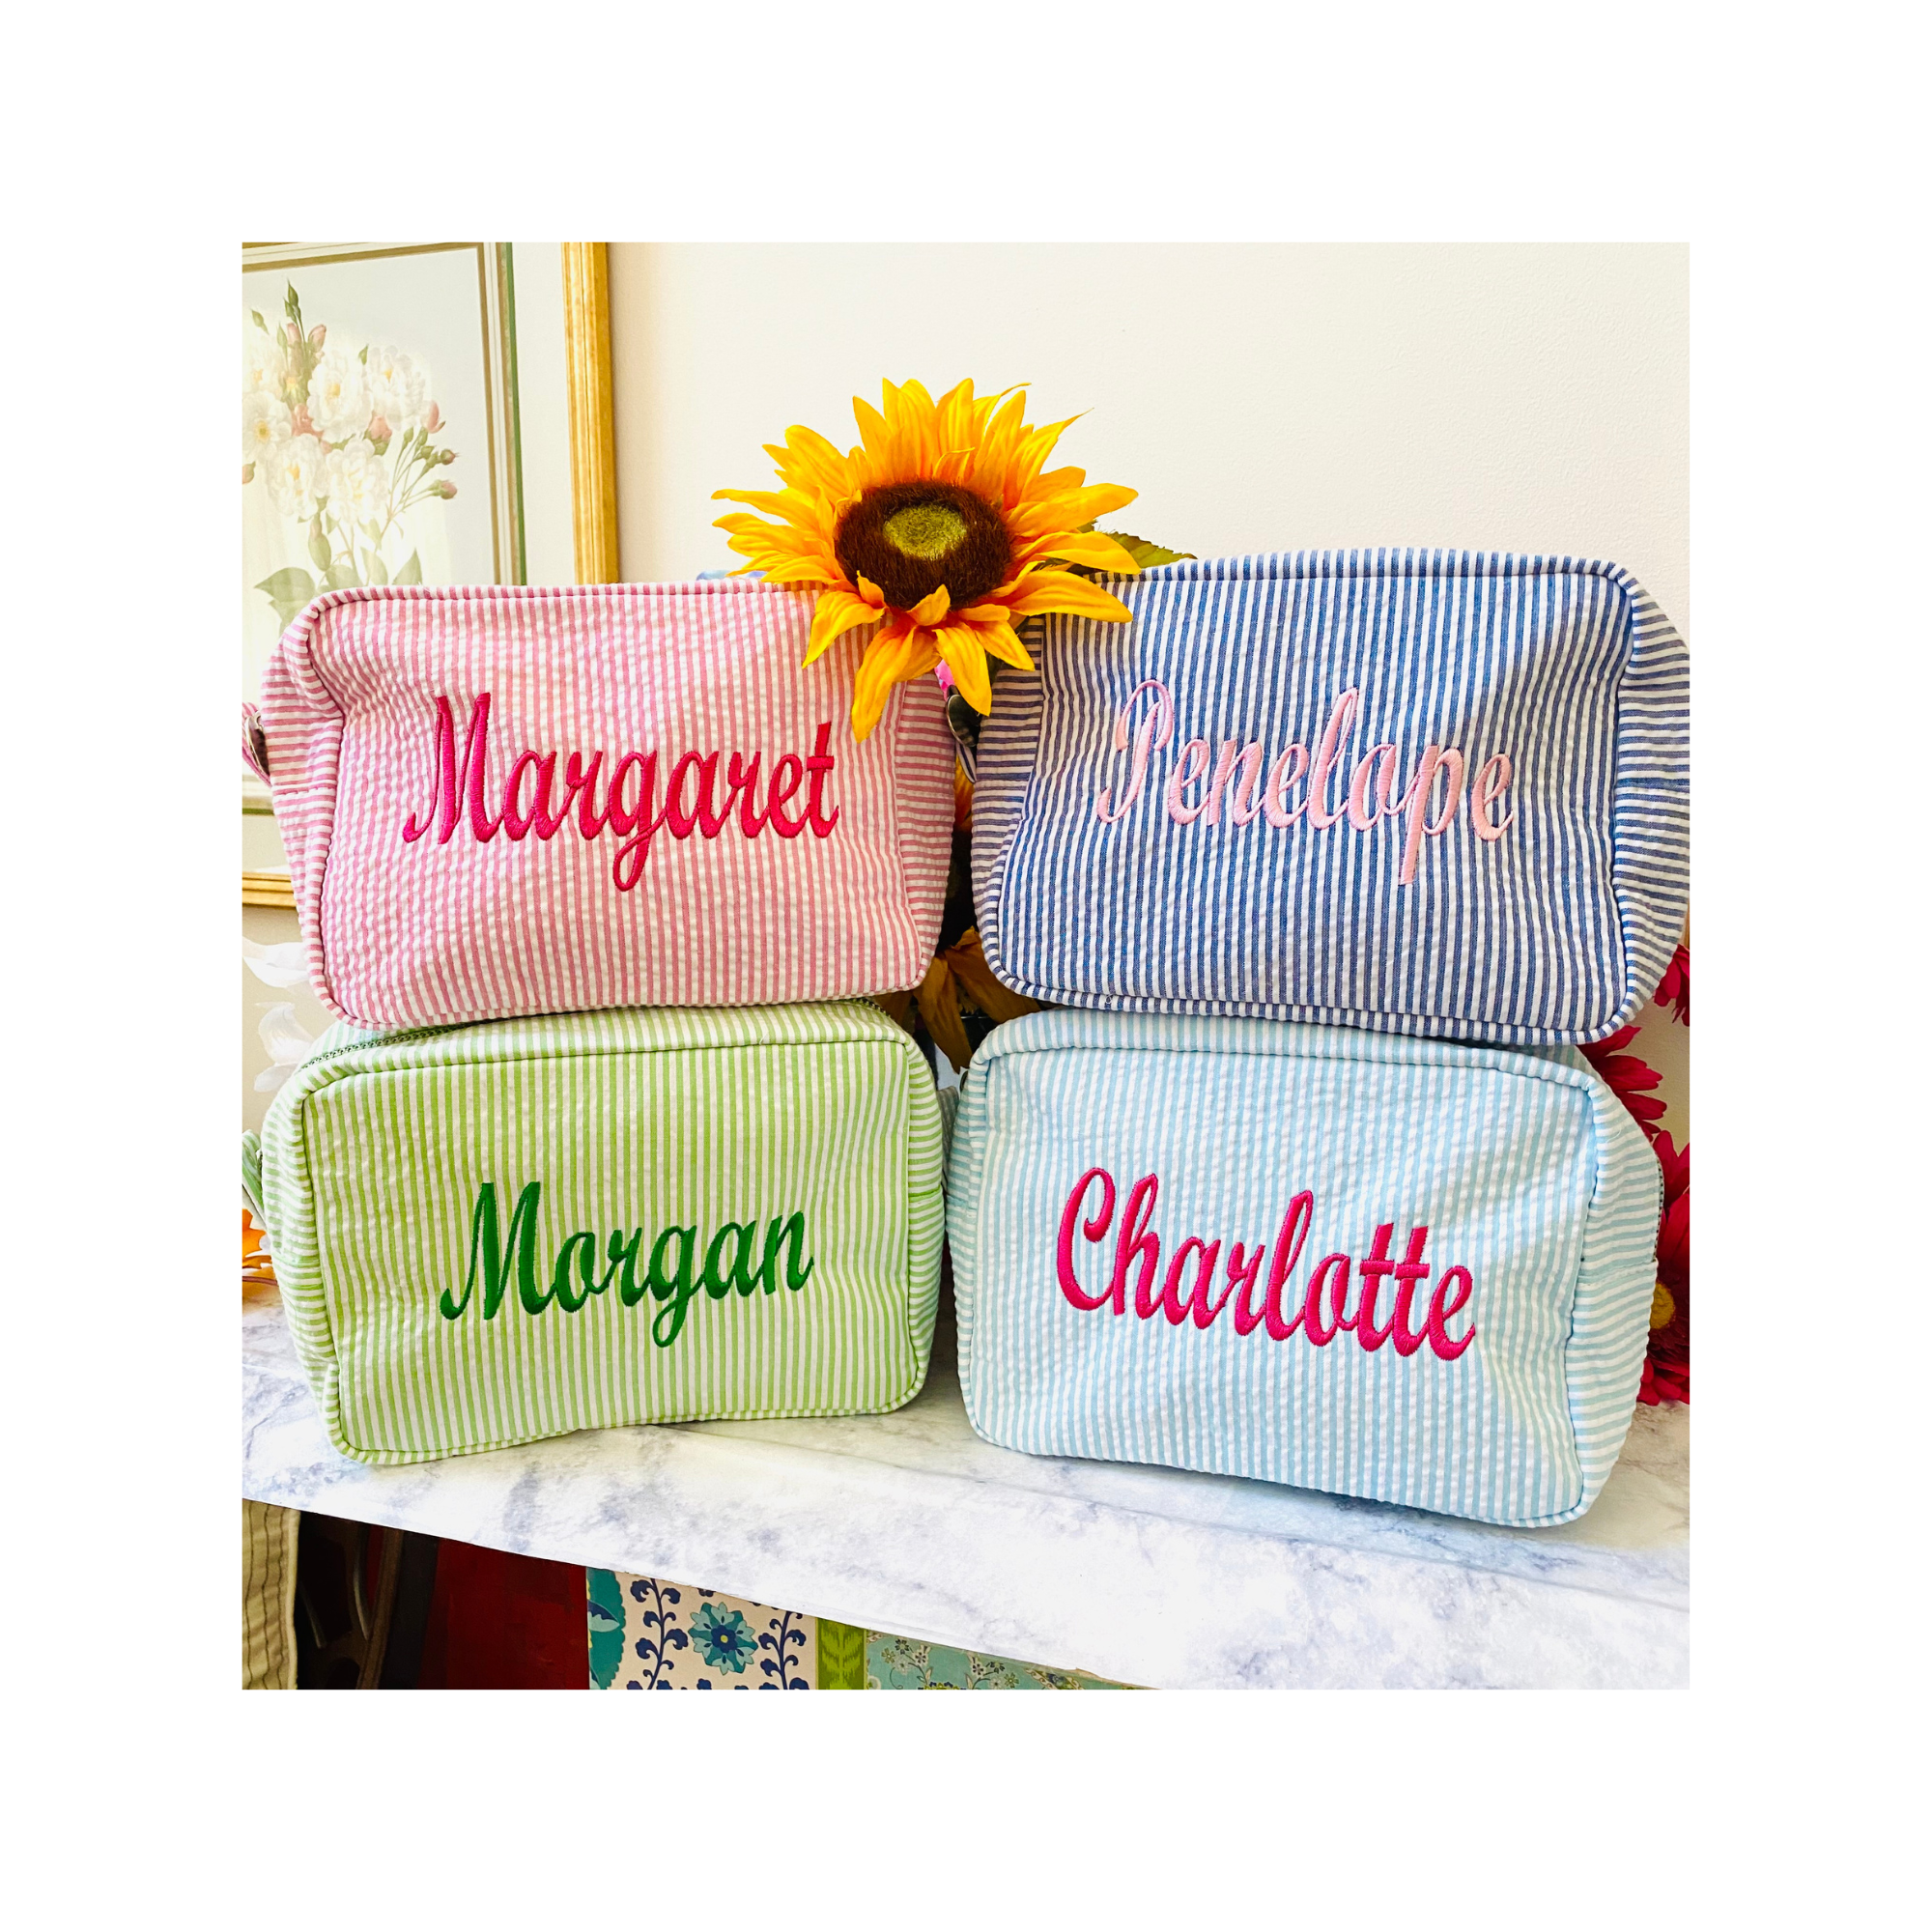 Christina's | Unique & Personalized Gifts